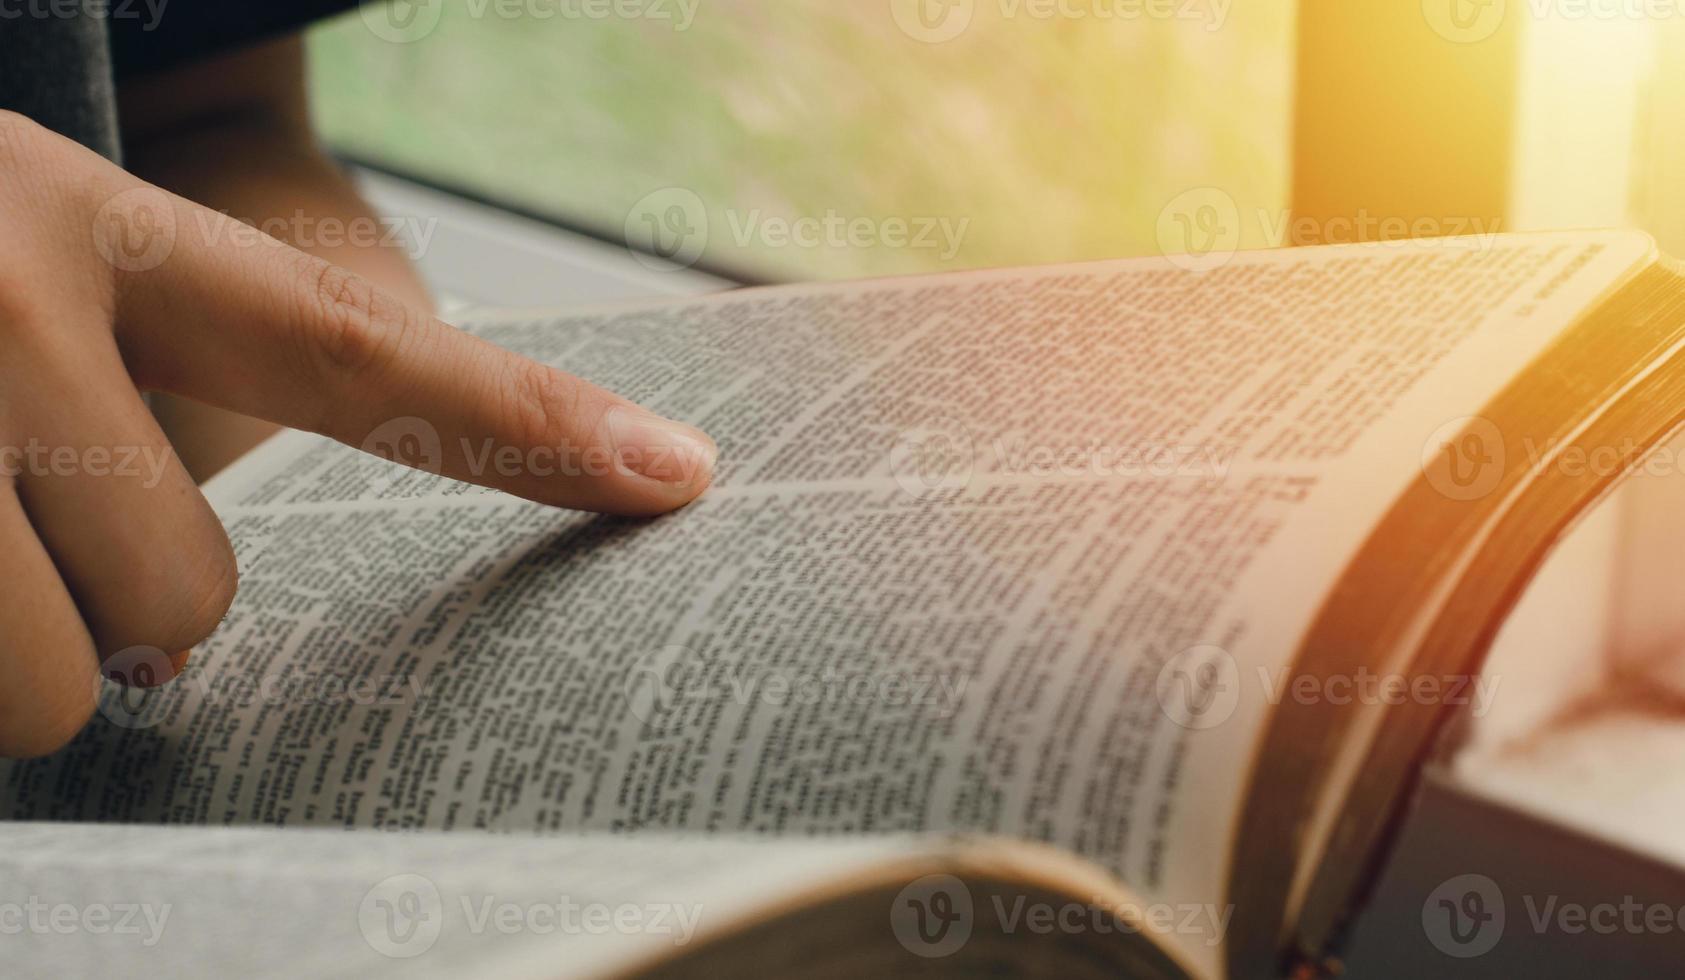 A young woman pointing out the verses of the Scriptures that are true to life. while reading the bible In the morning by the window sill photo